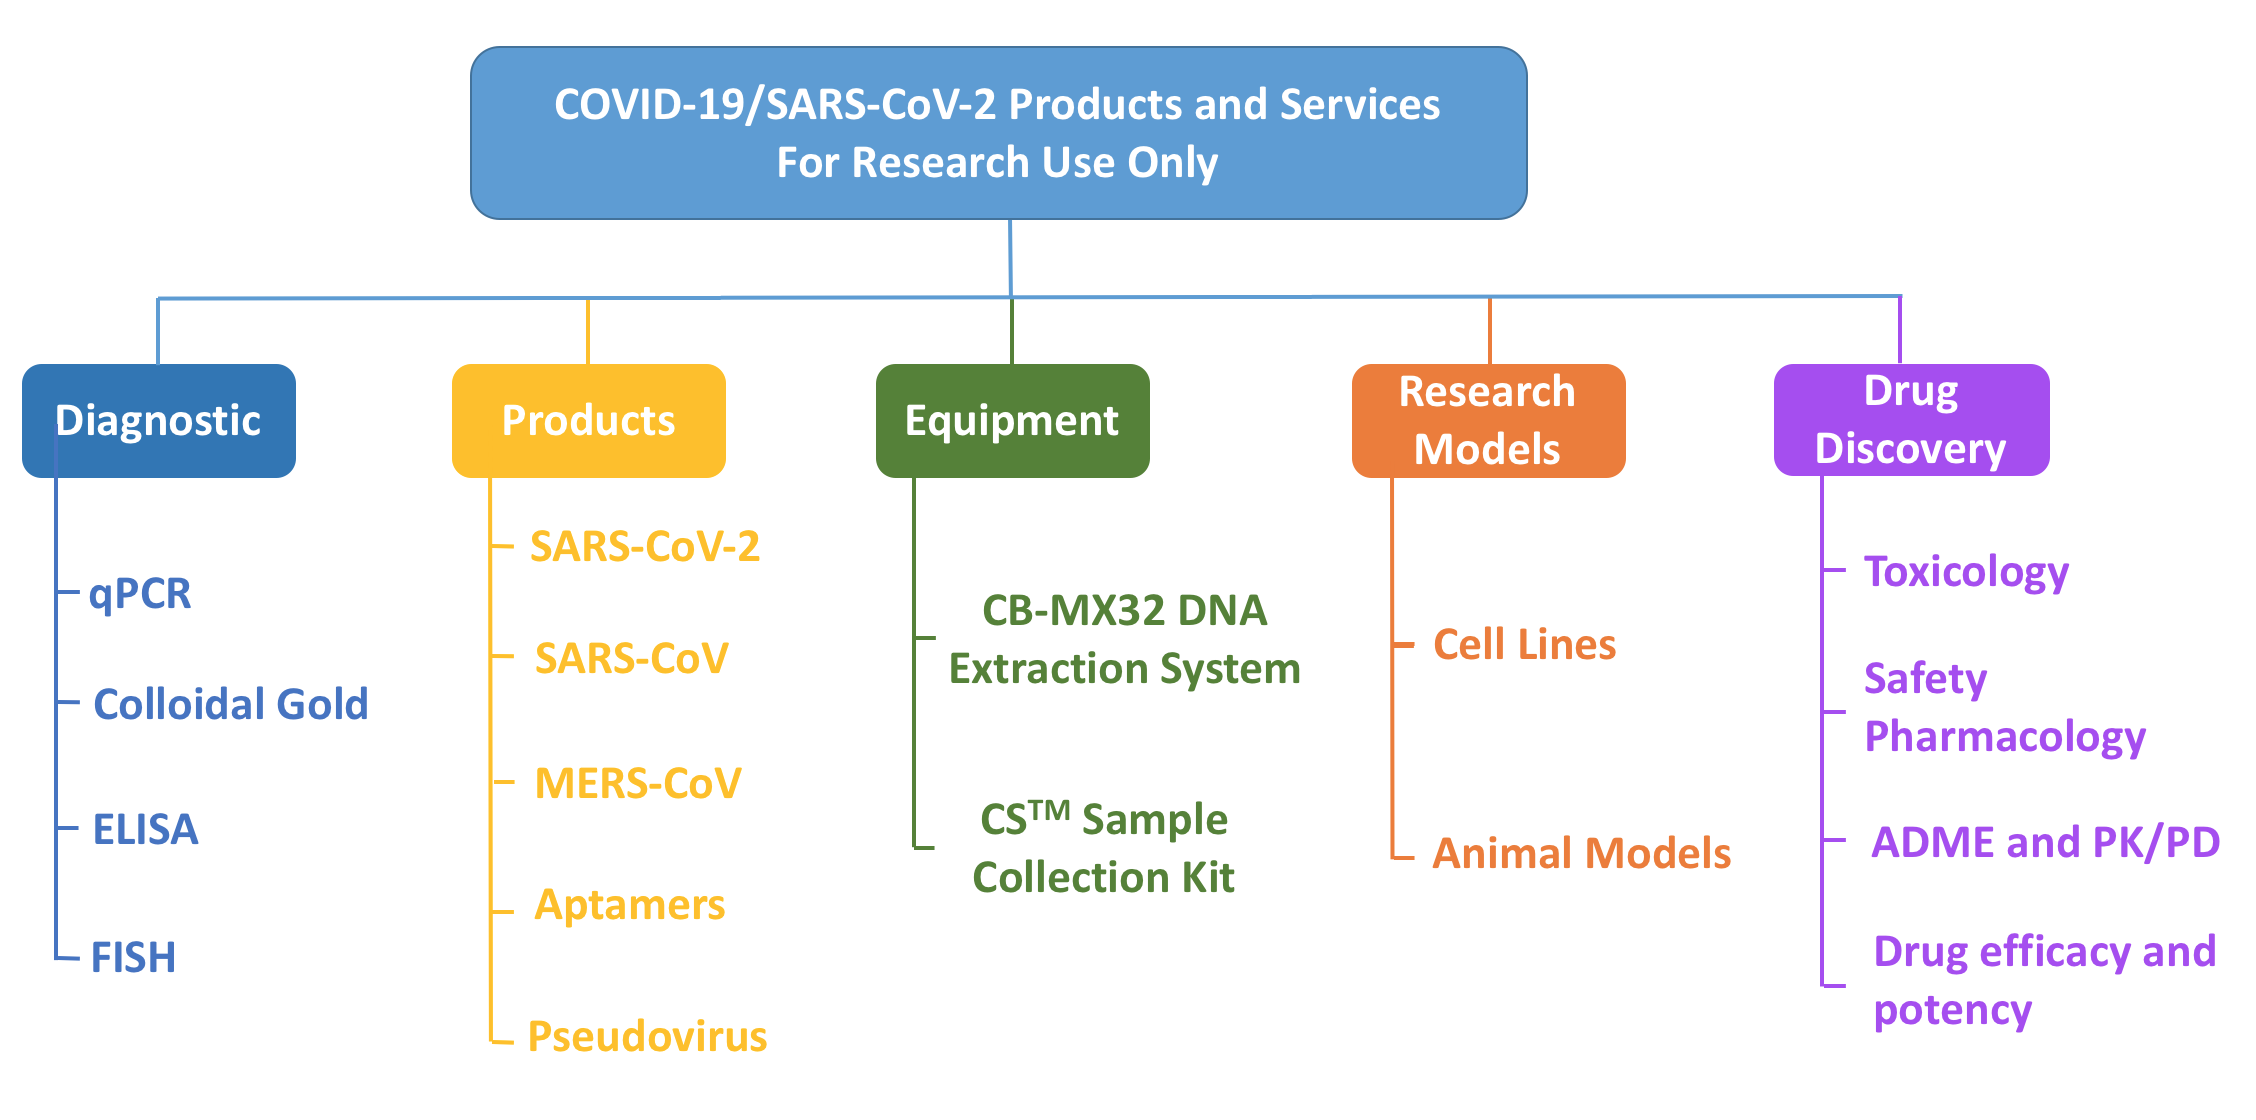 Research Solutions for COVID-19/SARS-CoV-2